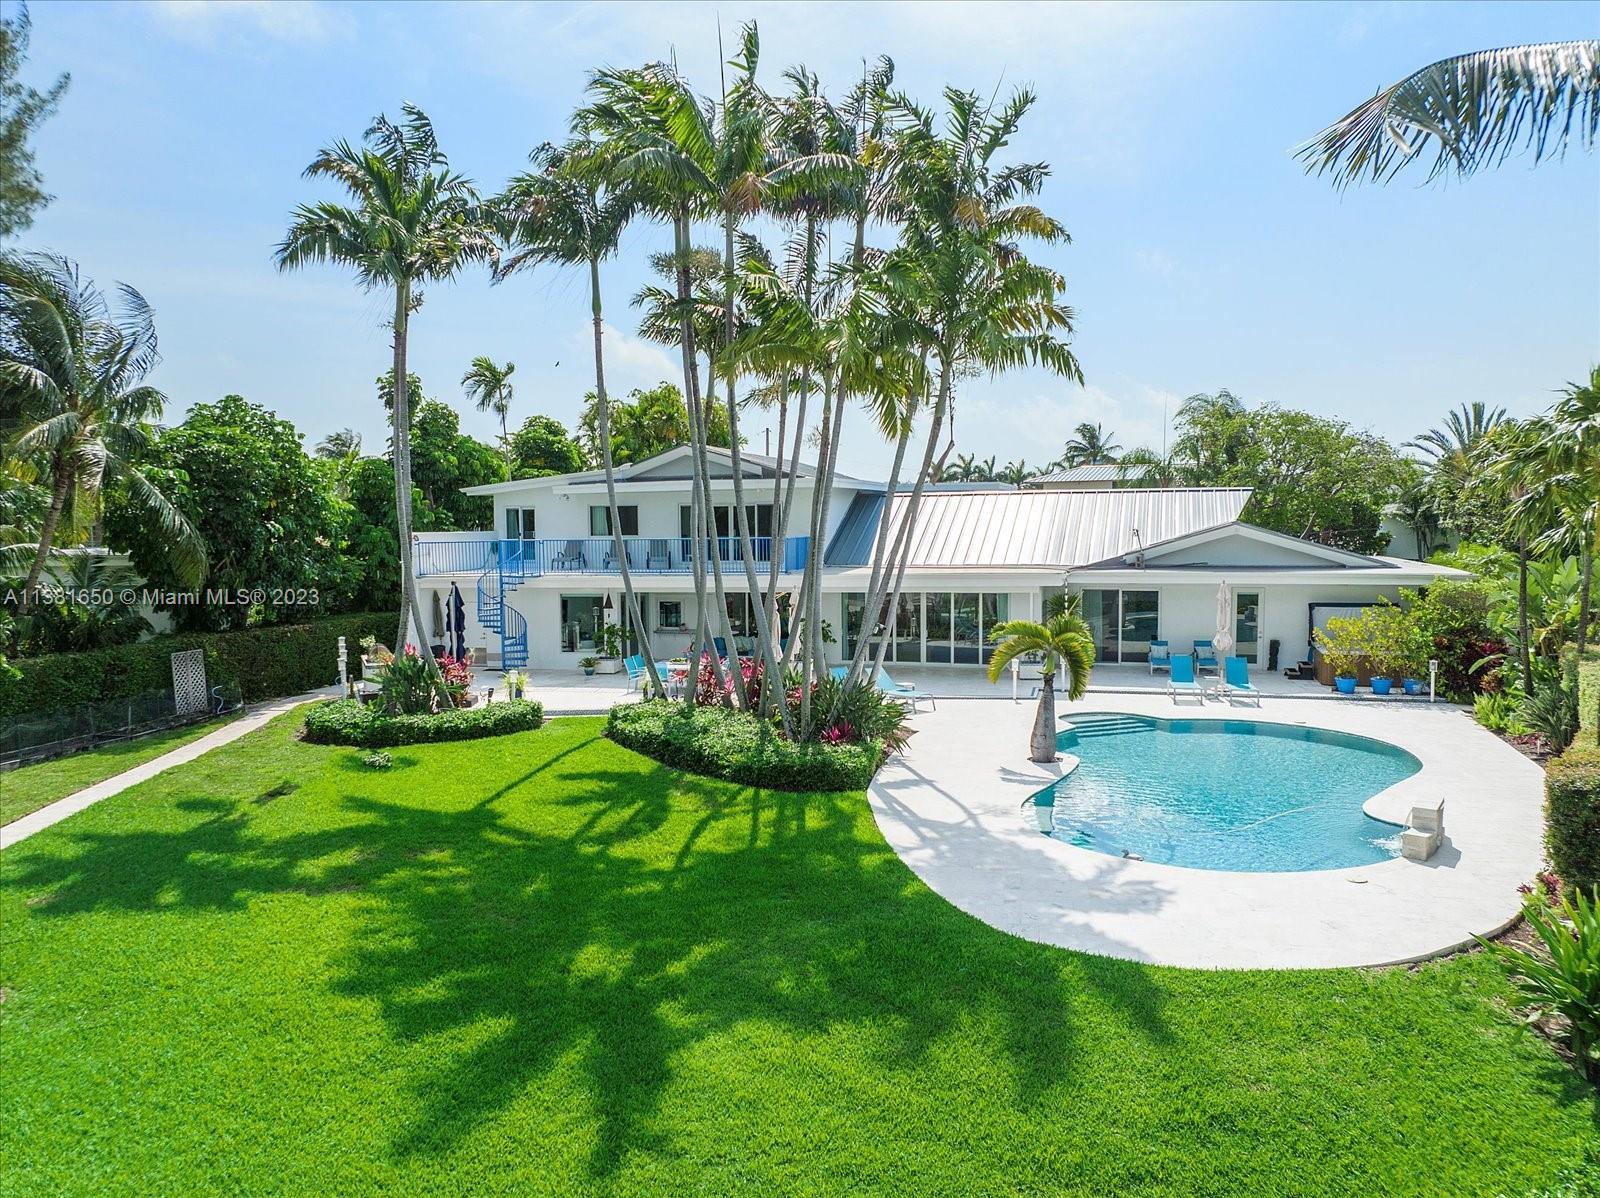 Don’t miss out on this rare opportunity to own a truly exceptional waterfront property in one of Mia